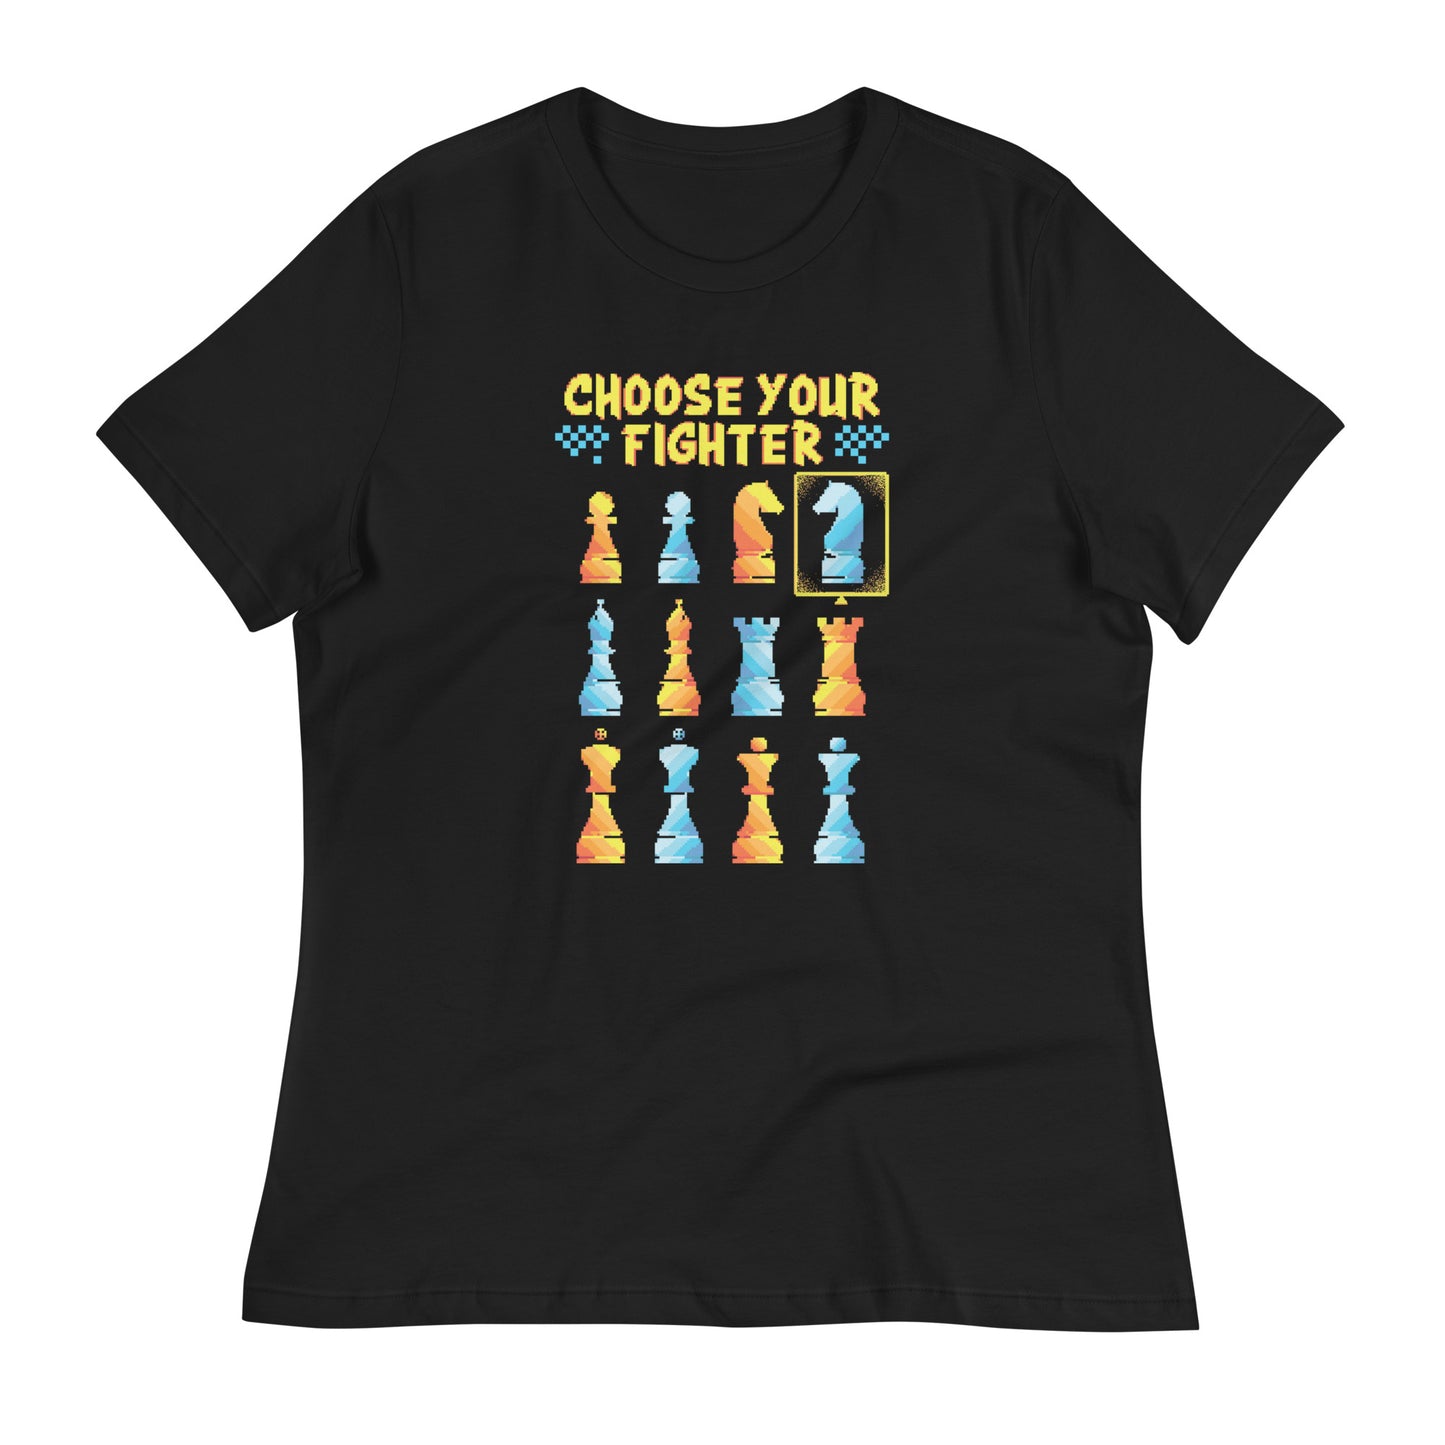 Choose Your Fighter Women's Signature Tee